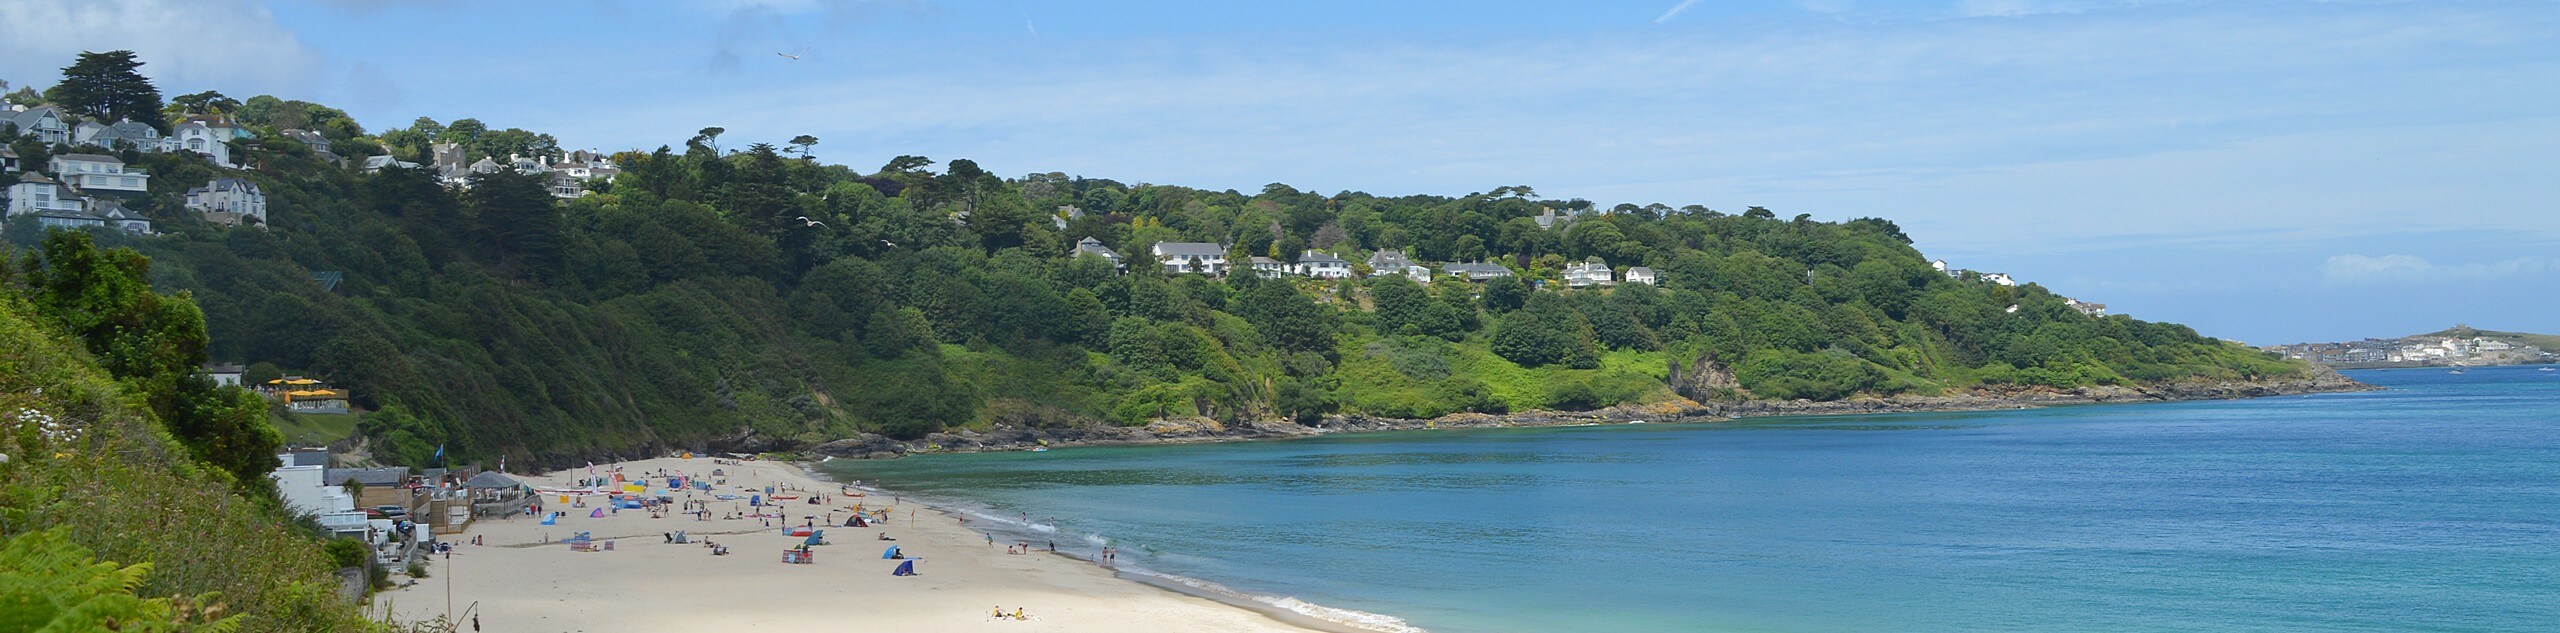 St Ives to Carbis Bay Walk